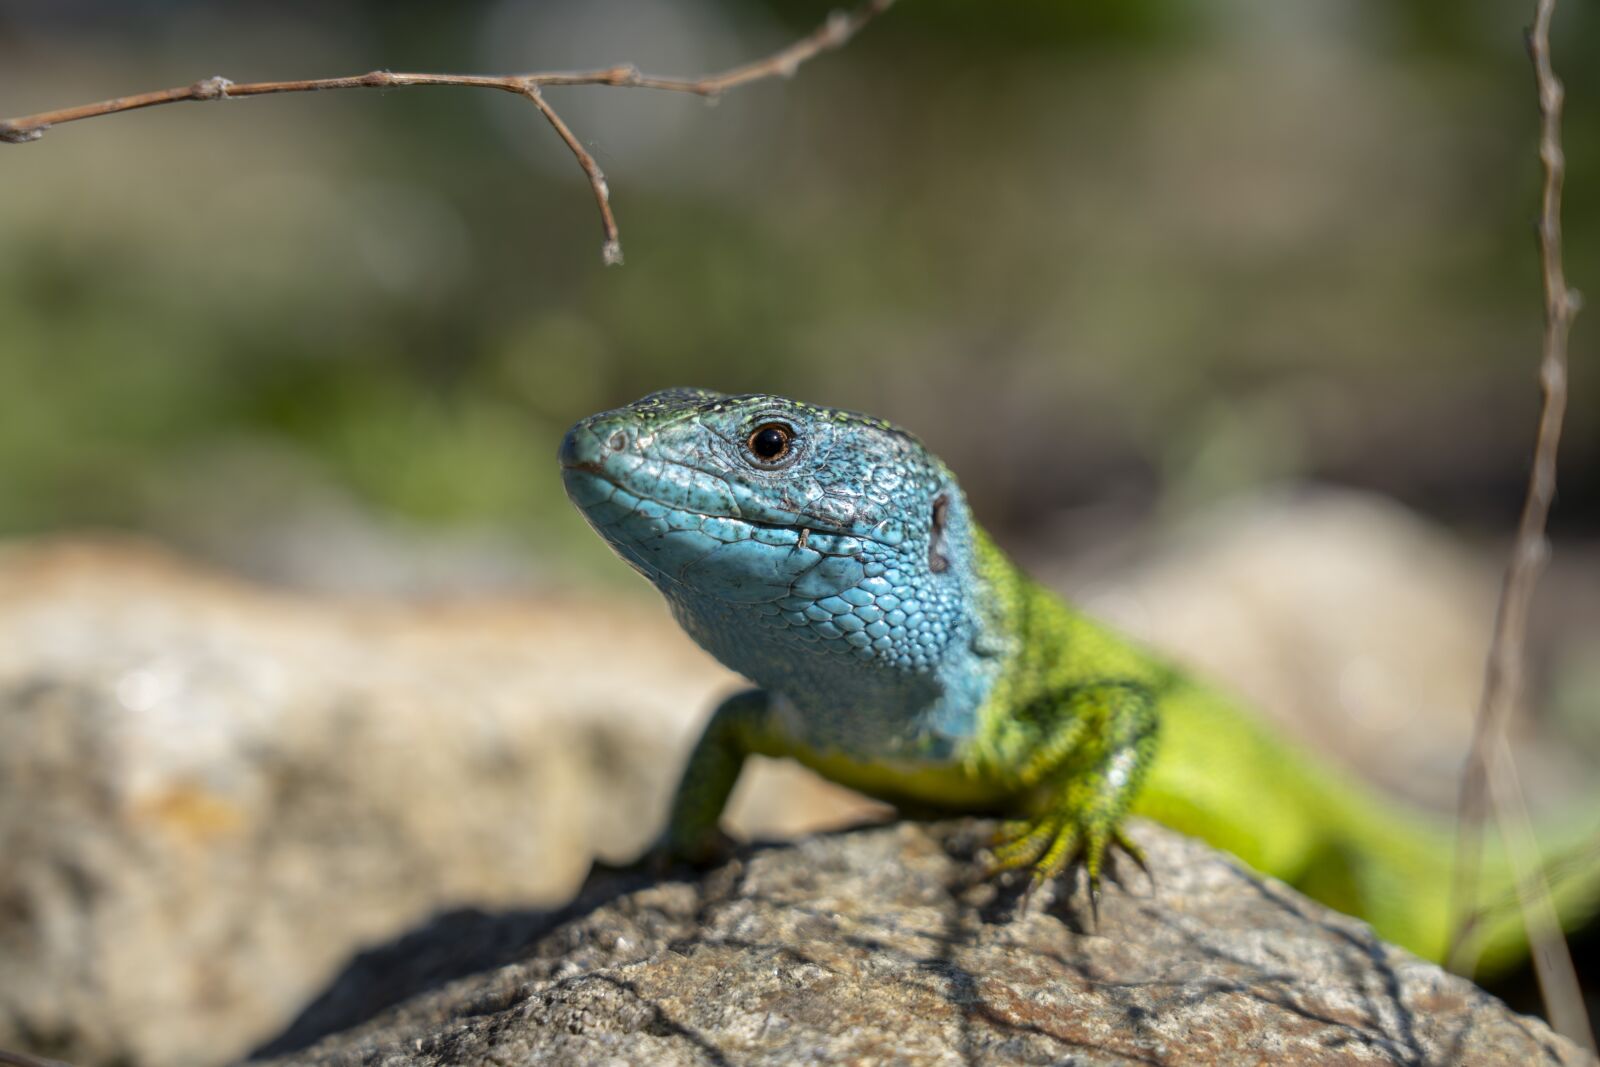 Sony a7 III sample photo. The lizard, reptile, nature photography